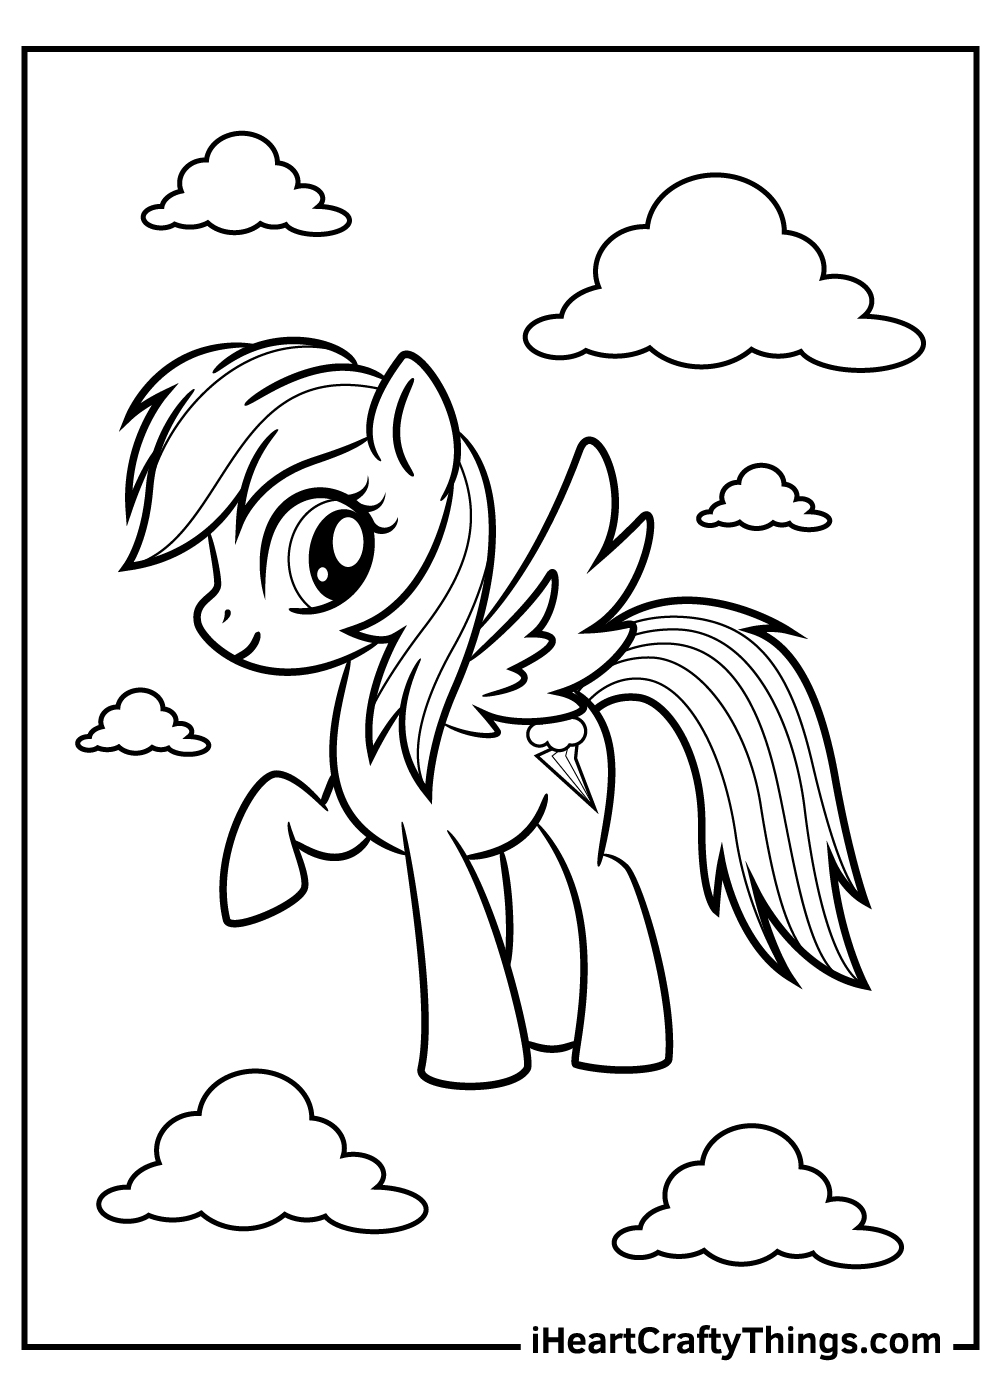 My little pony coloring pages free printables